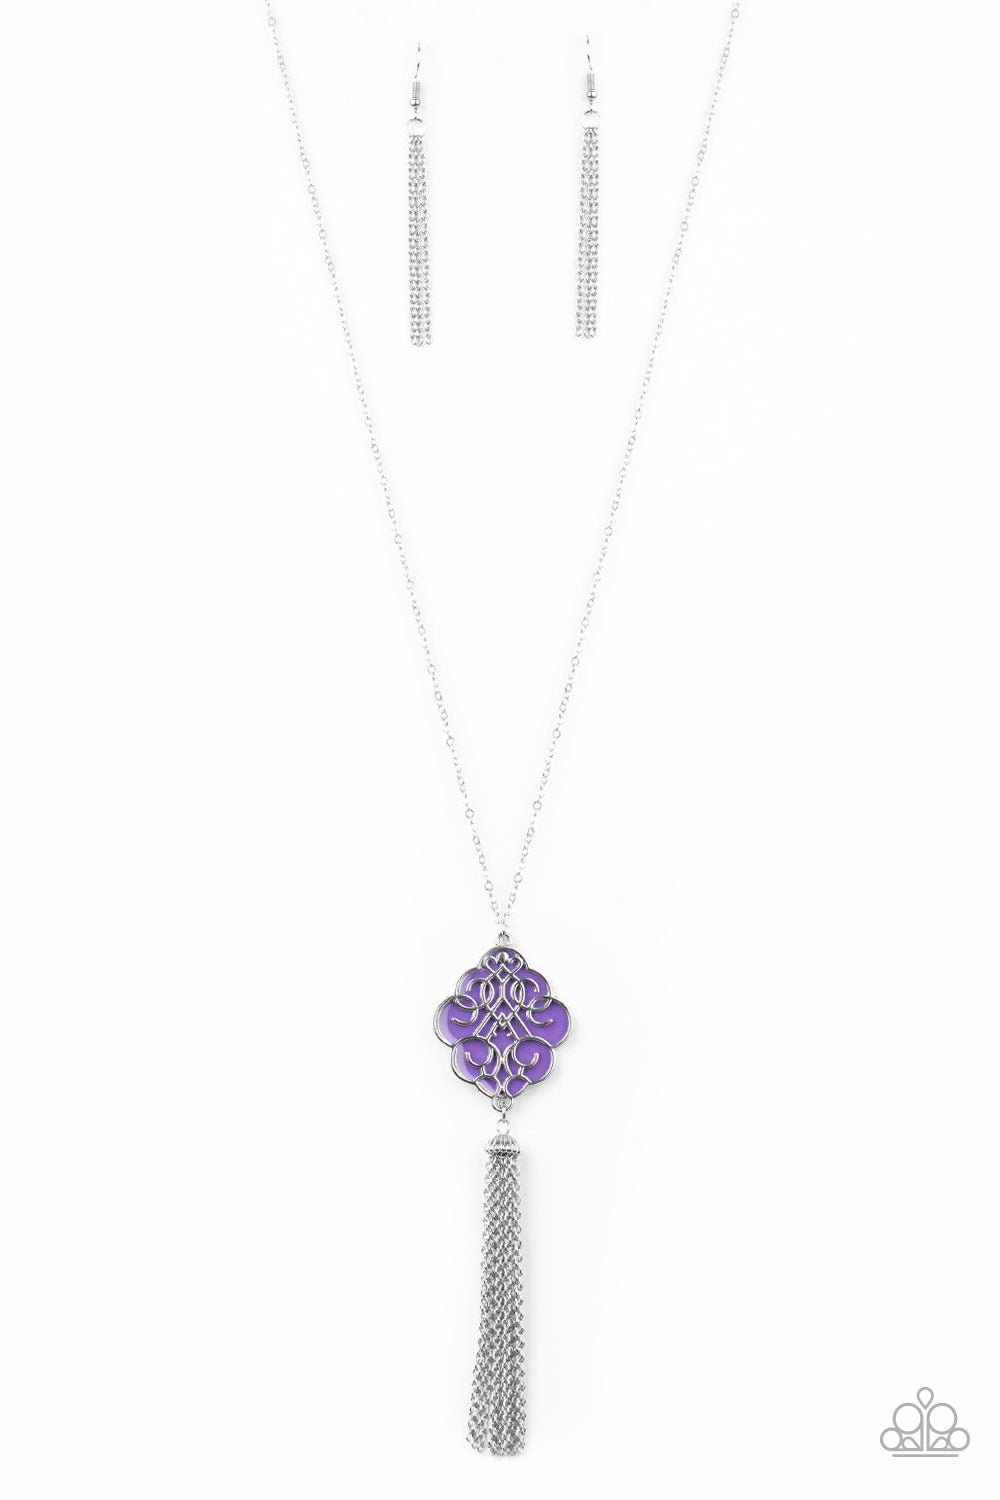 Malibu Mandala - Purple and Silver Necklace & Earrings - Paparazzi Accessories - 
Shimmery silver filigree swirls across a shiny purple backdrop, coalescing into a colorful pendant. A glistening silver chain tassel swings from the bottom of the pendant for a whimsical finish. Features an adjustable clasp closure.